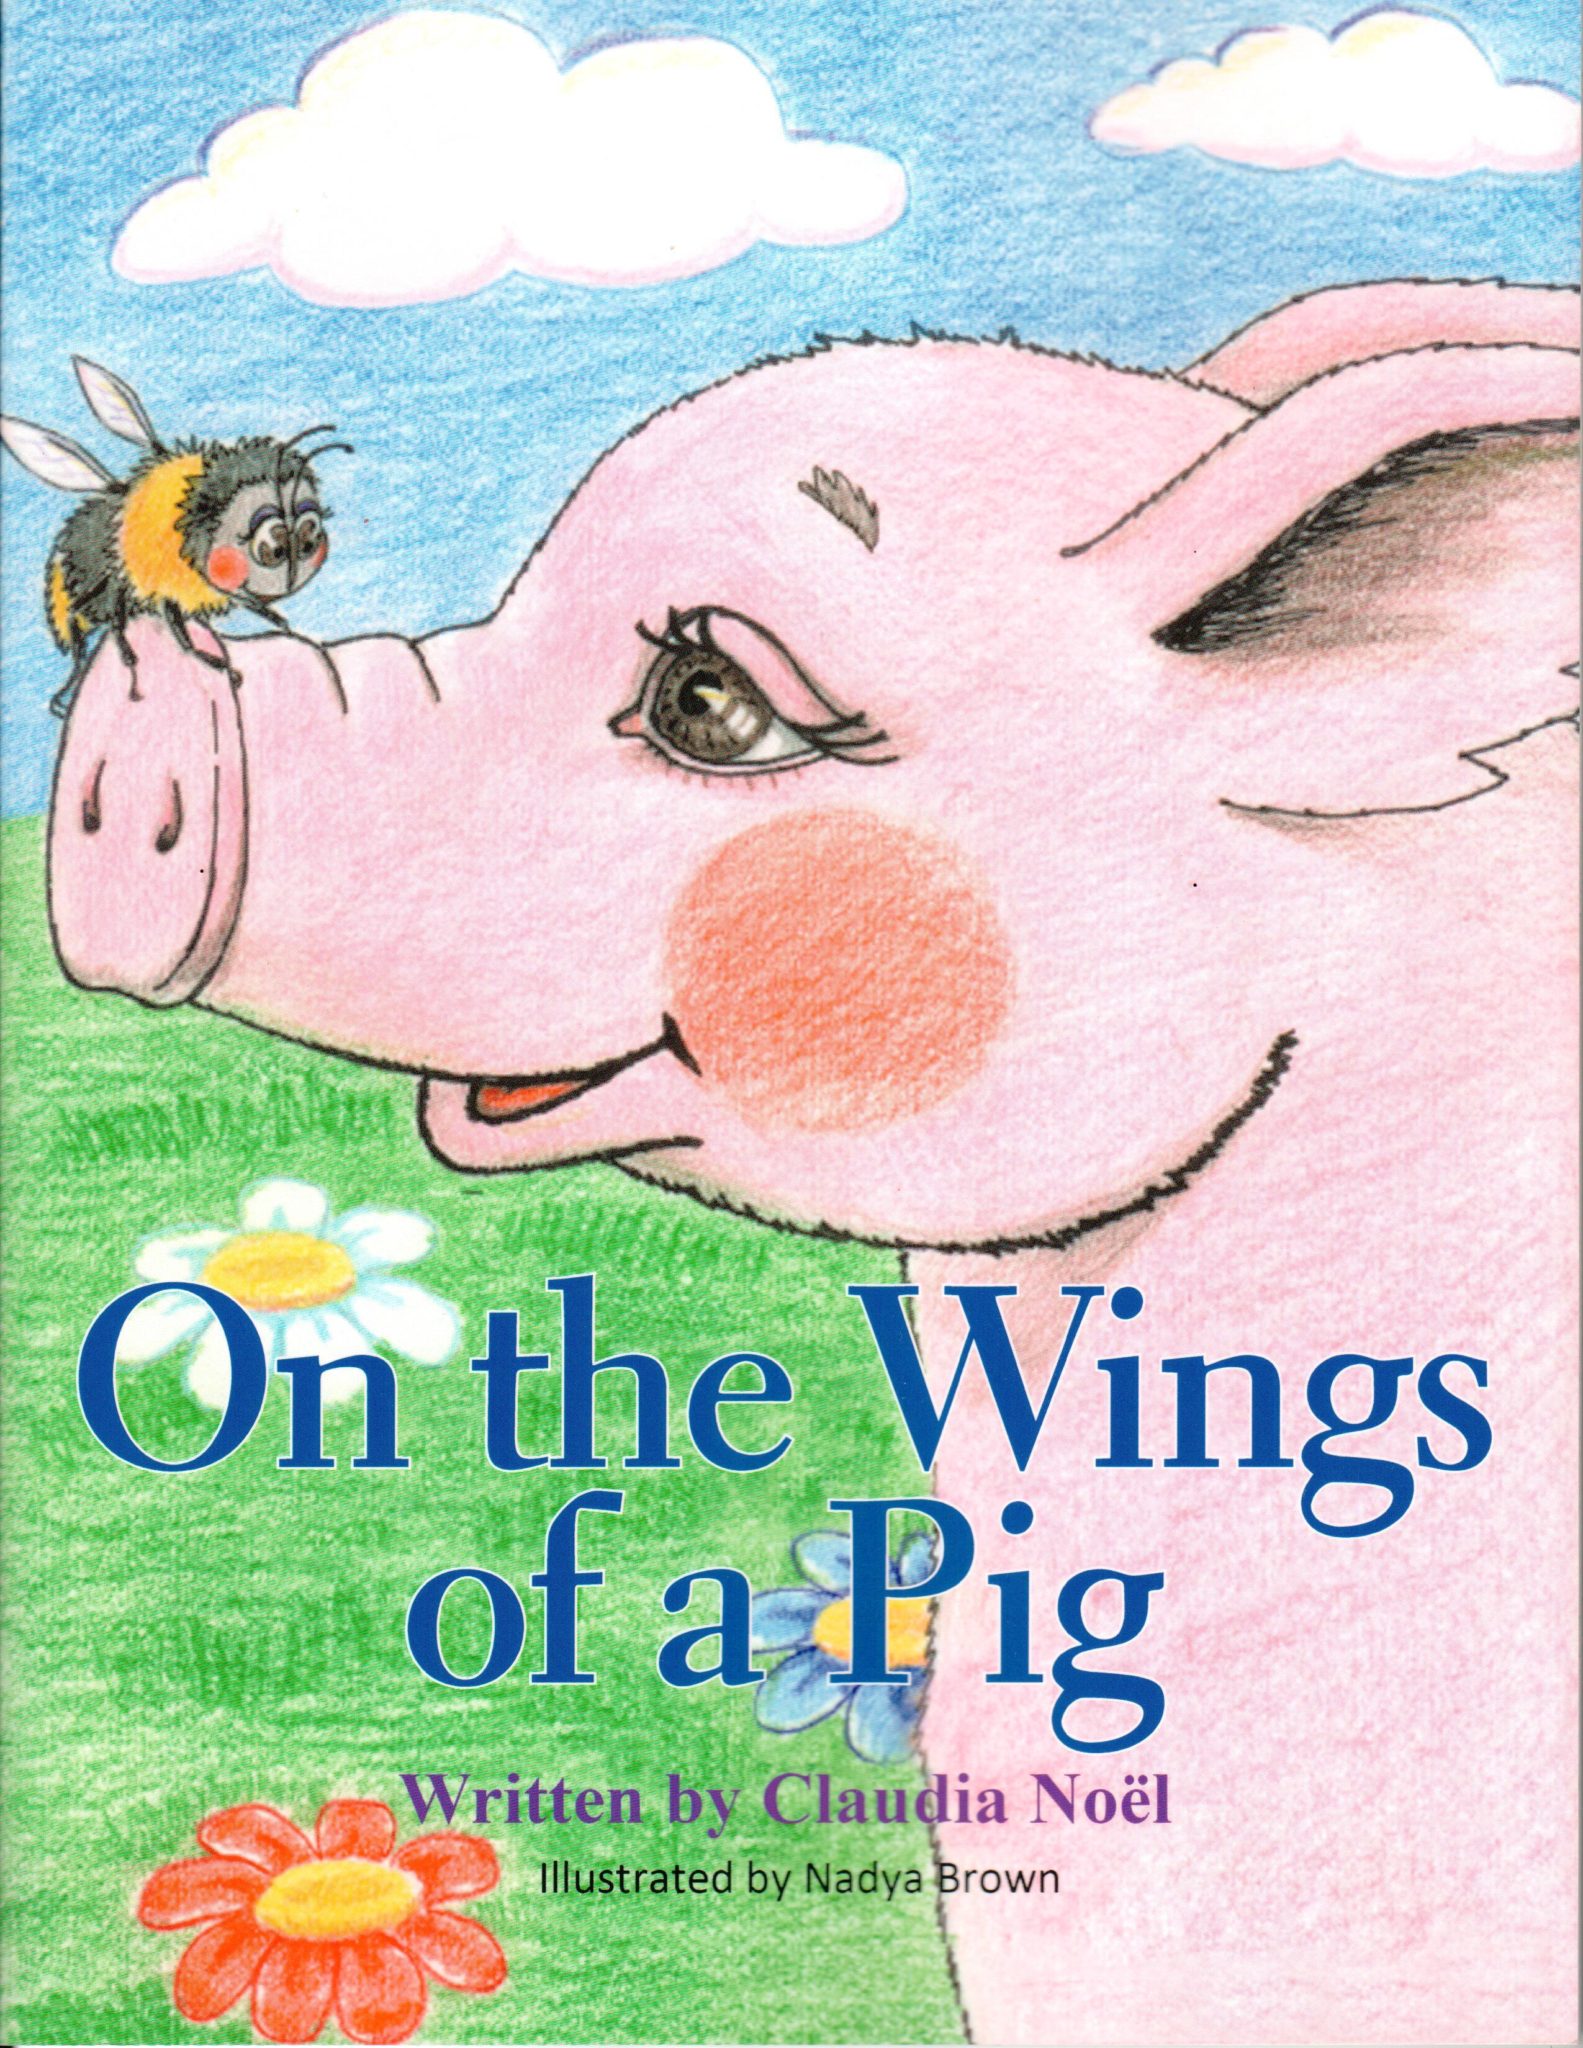 On the Wings of a Pig by Claudia Noël